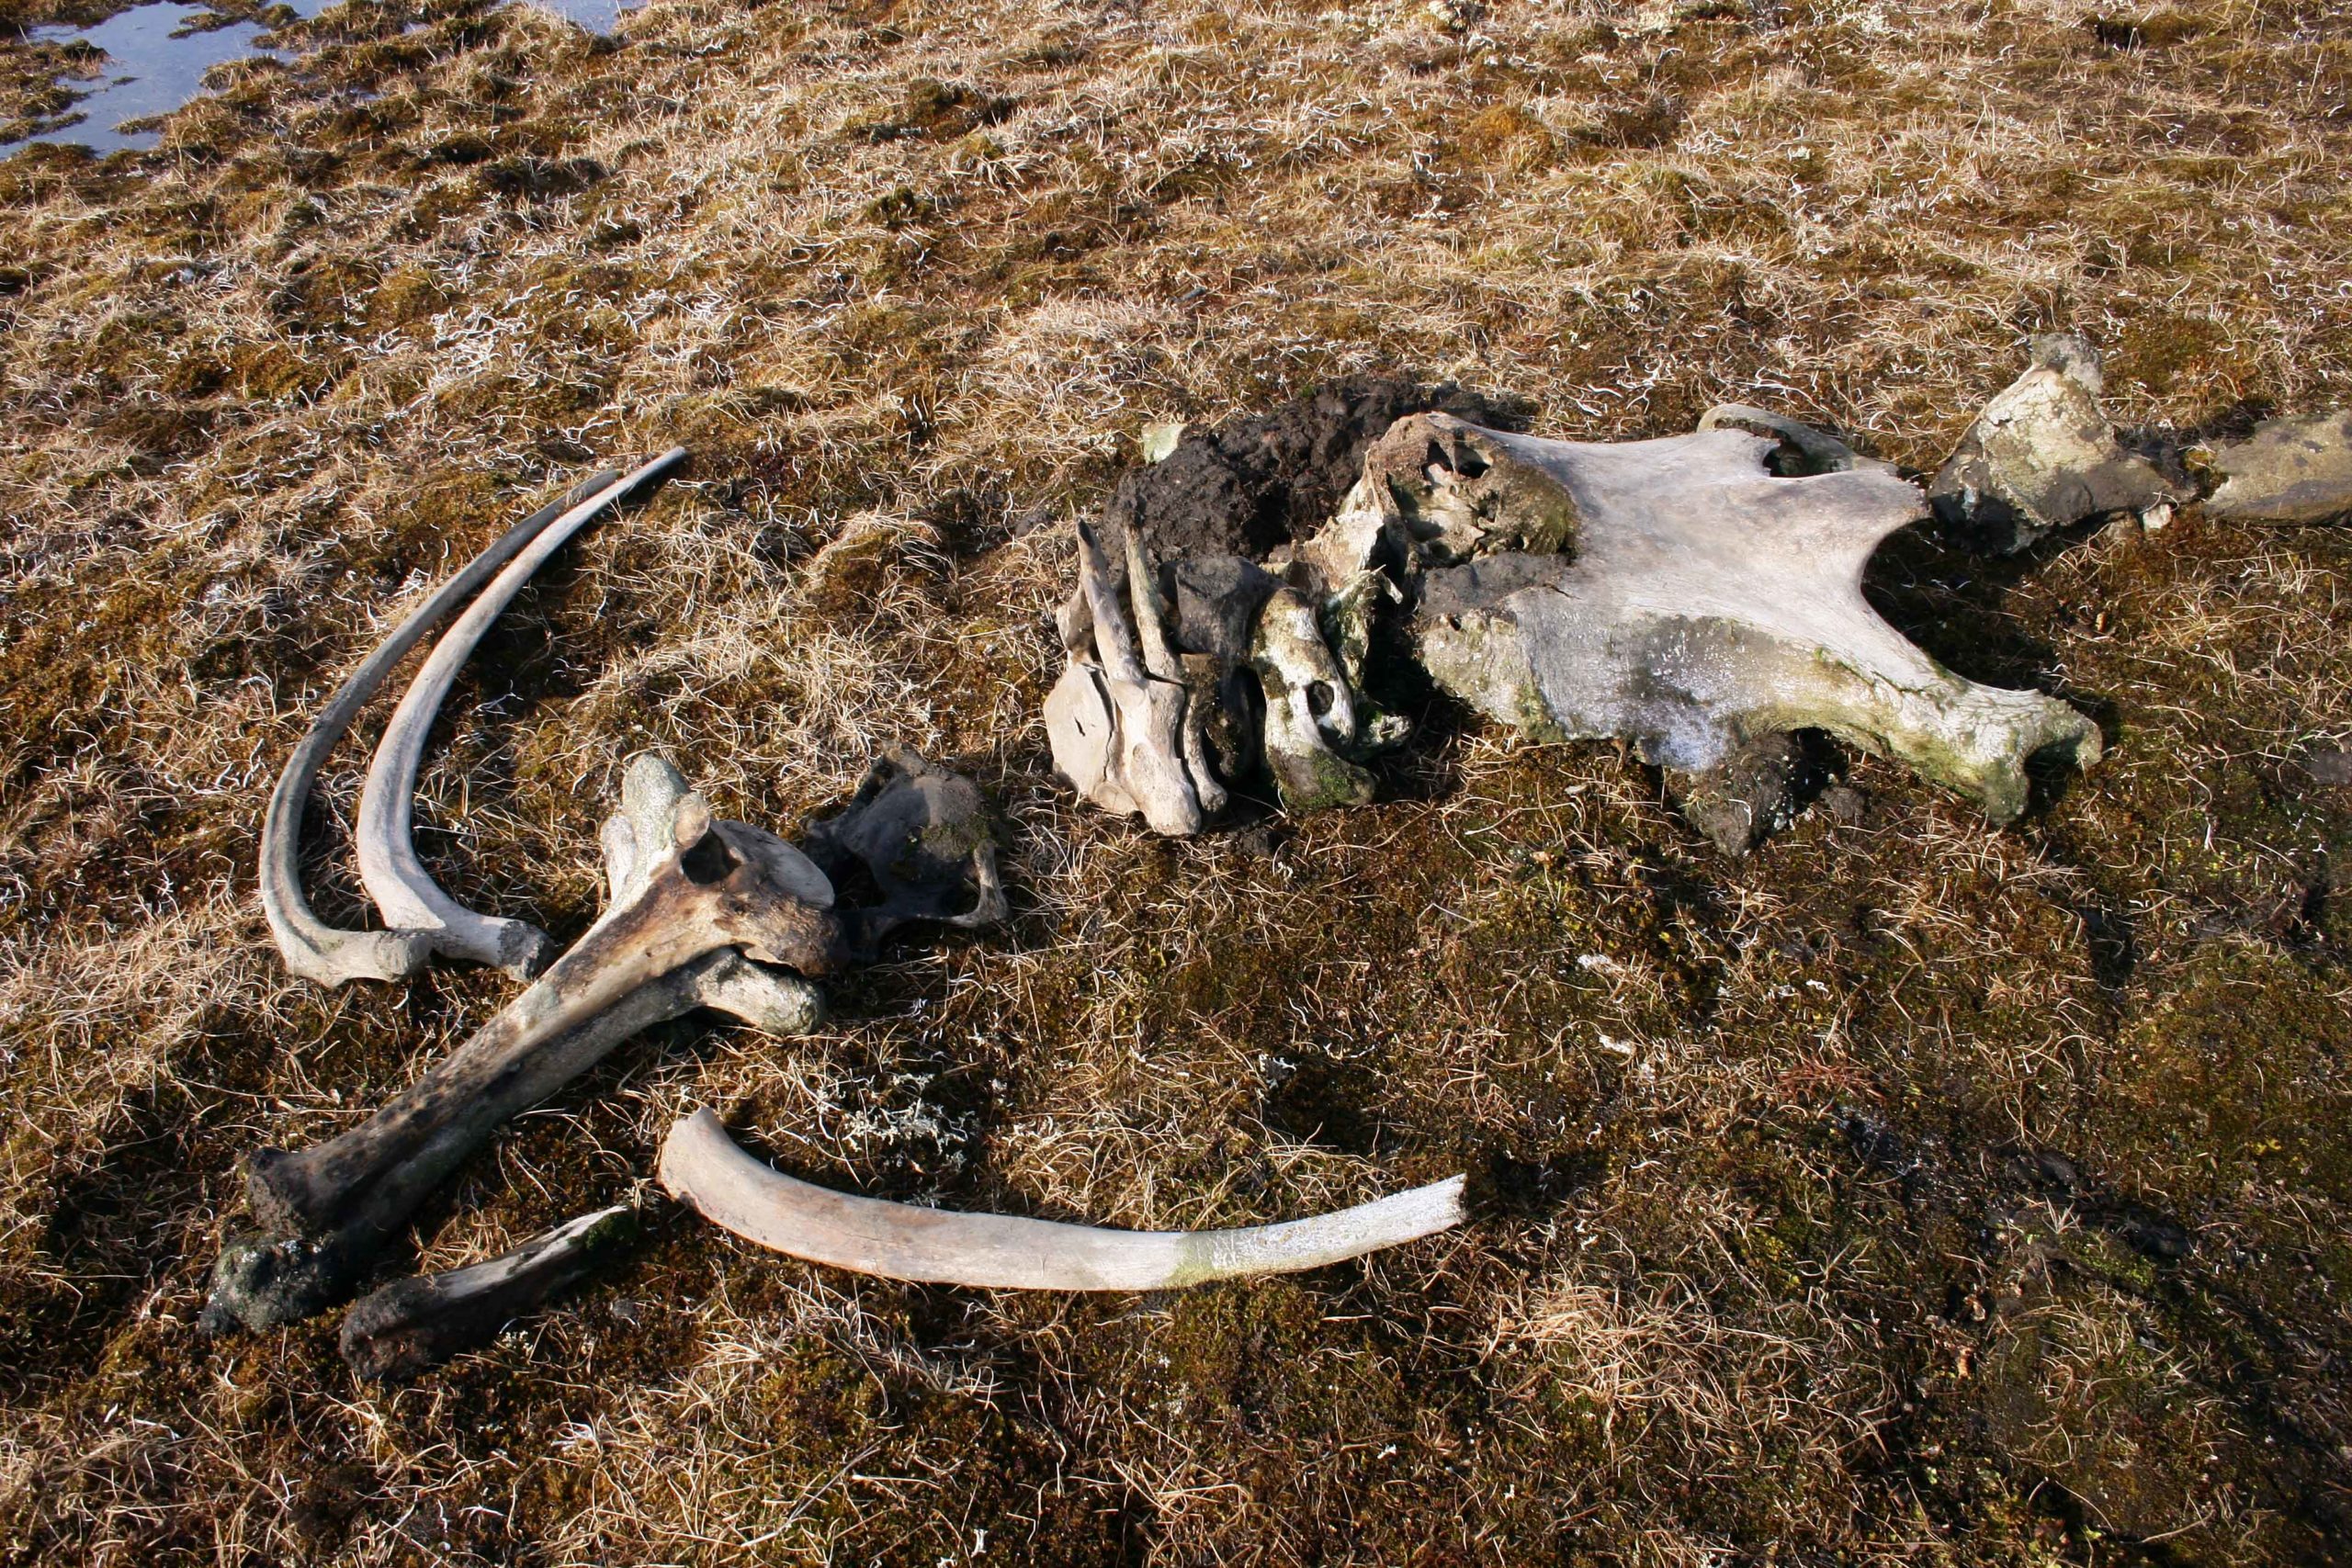 The Pavlov mammoth thoracic and neck vertebrae, ribs, and cranium, laid out after being excavated.  (Photo: I.S. Pavlov)